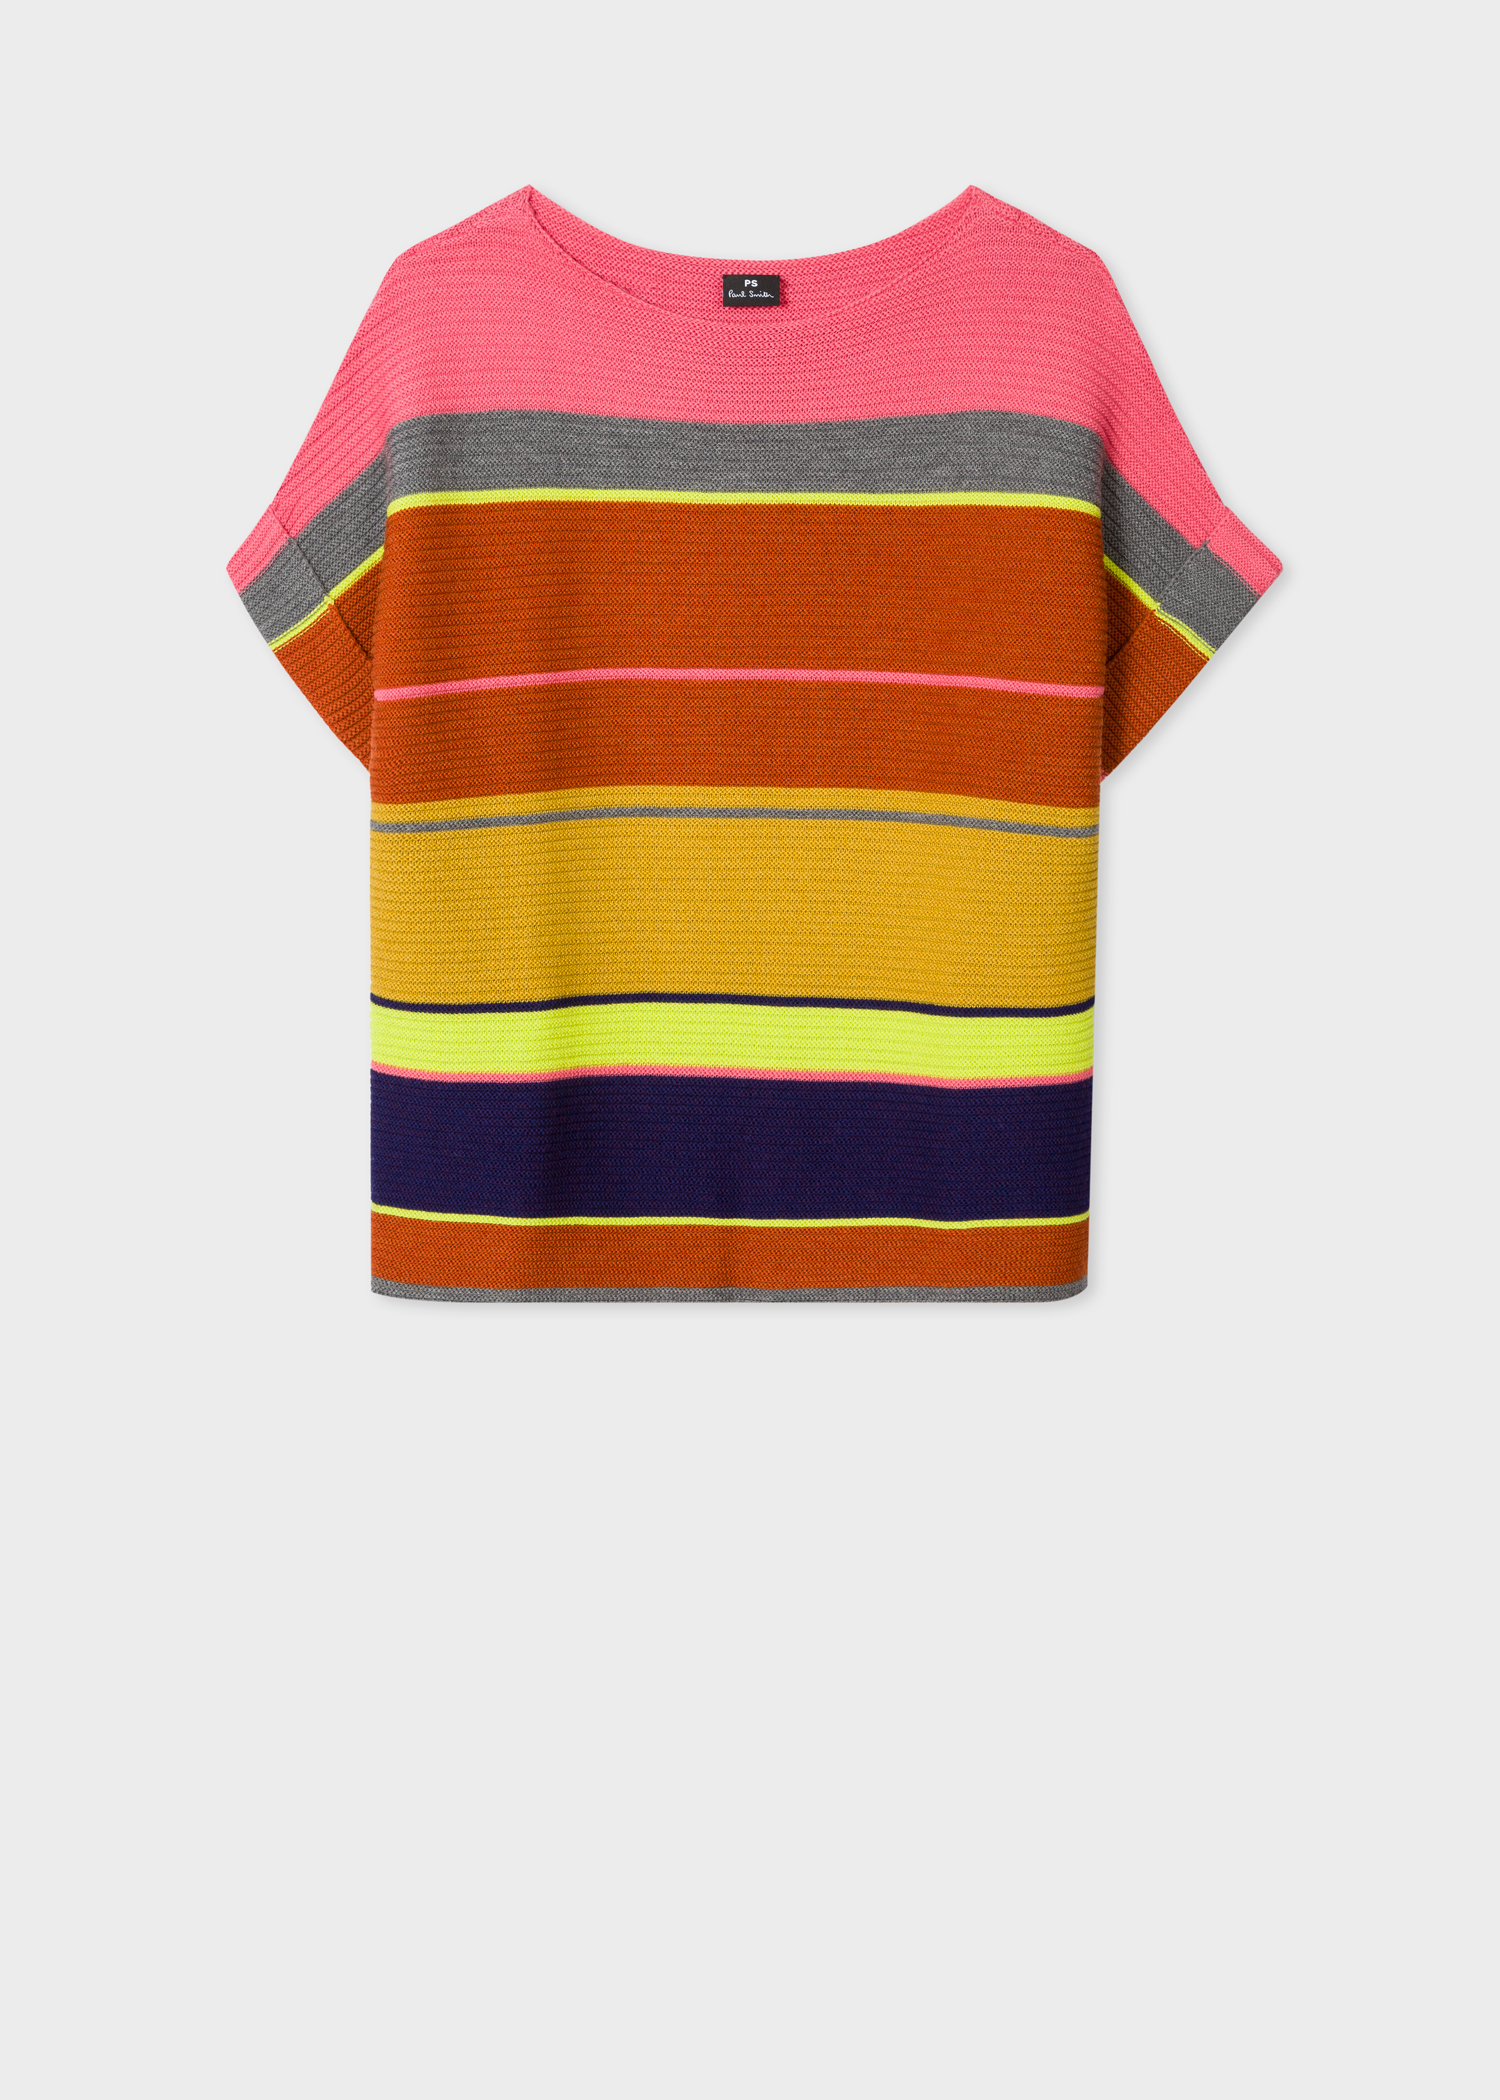 Front view - Women's Multi-Coloured Stripe Wool And Cotton-Blend Short-Sleeve Sweater Paul Smith